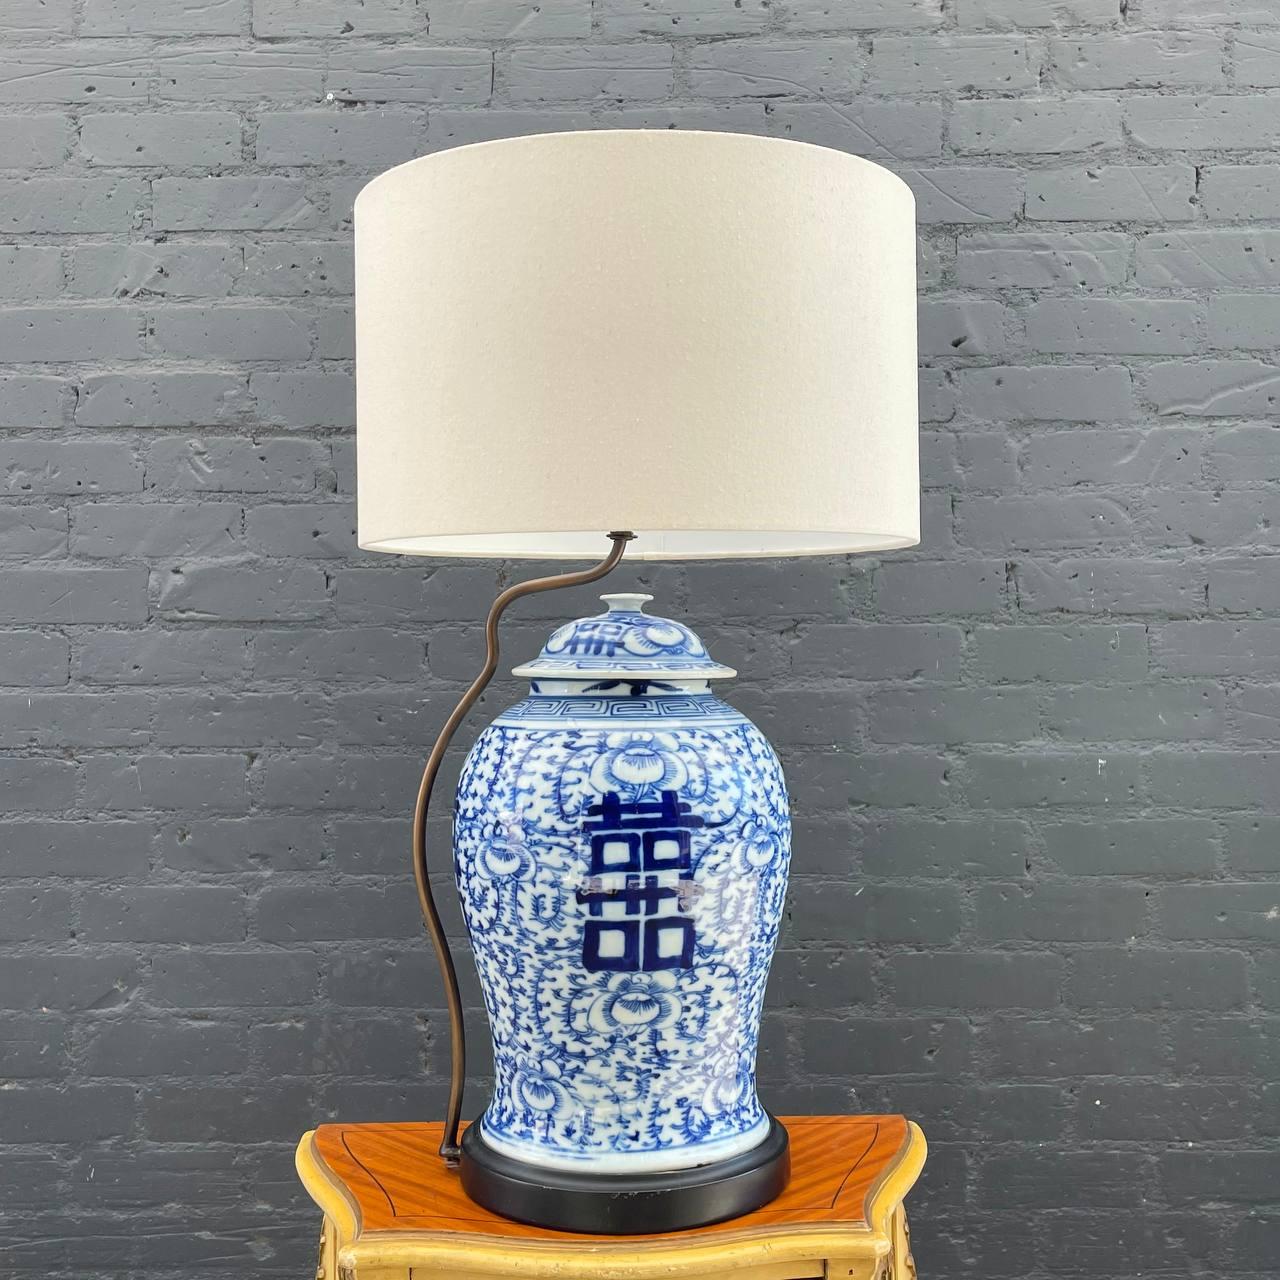 Antique Chinese Double Happiness Jar Porcelain Table Lamp 

Country: China
Materials: Carved Wood, Porcelain, Linen Shade
Condition: Newly Linen Shade, One Minor Chip
Style: Chinese Antique
Year: 1960s

$1,400

Dimensions 
29”H x 10”W x